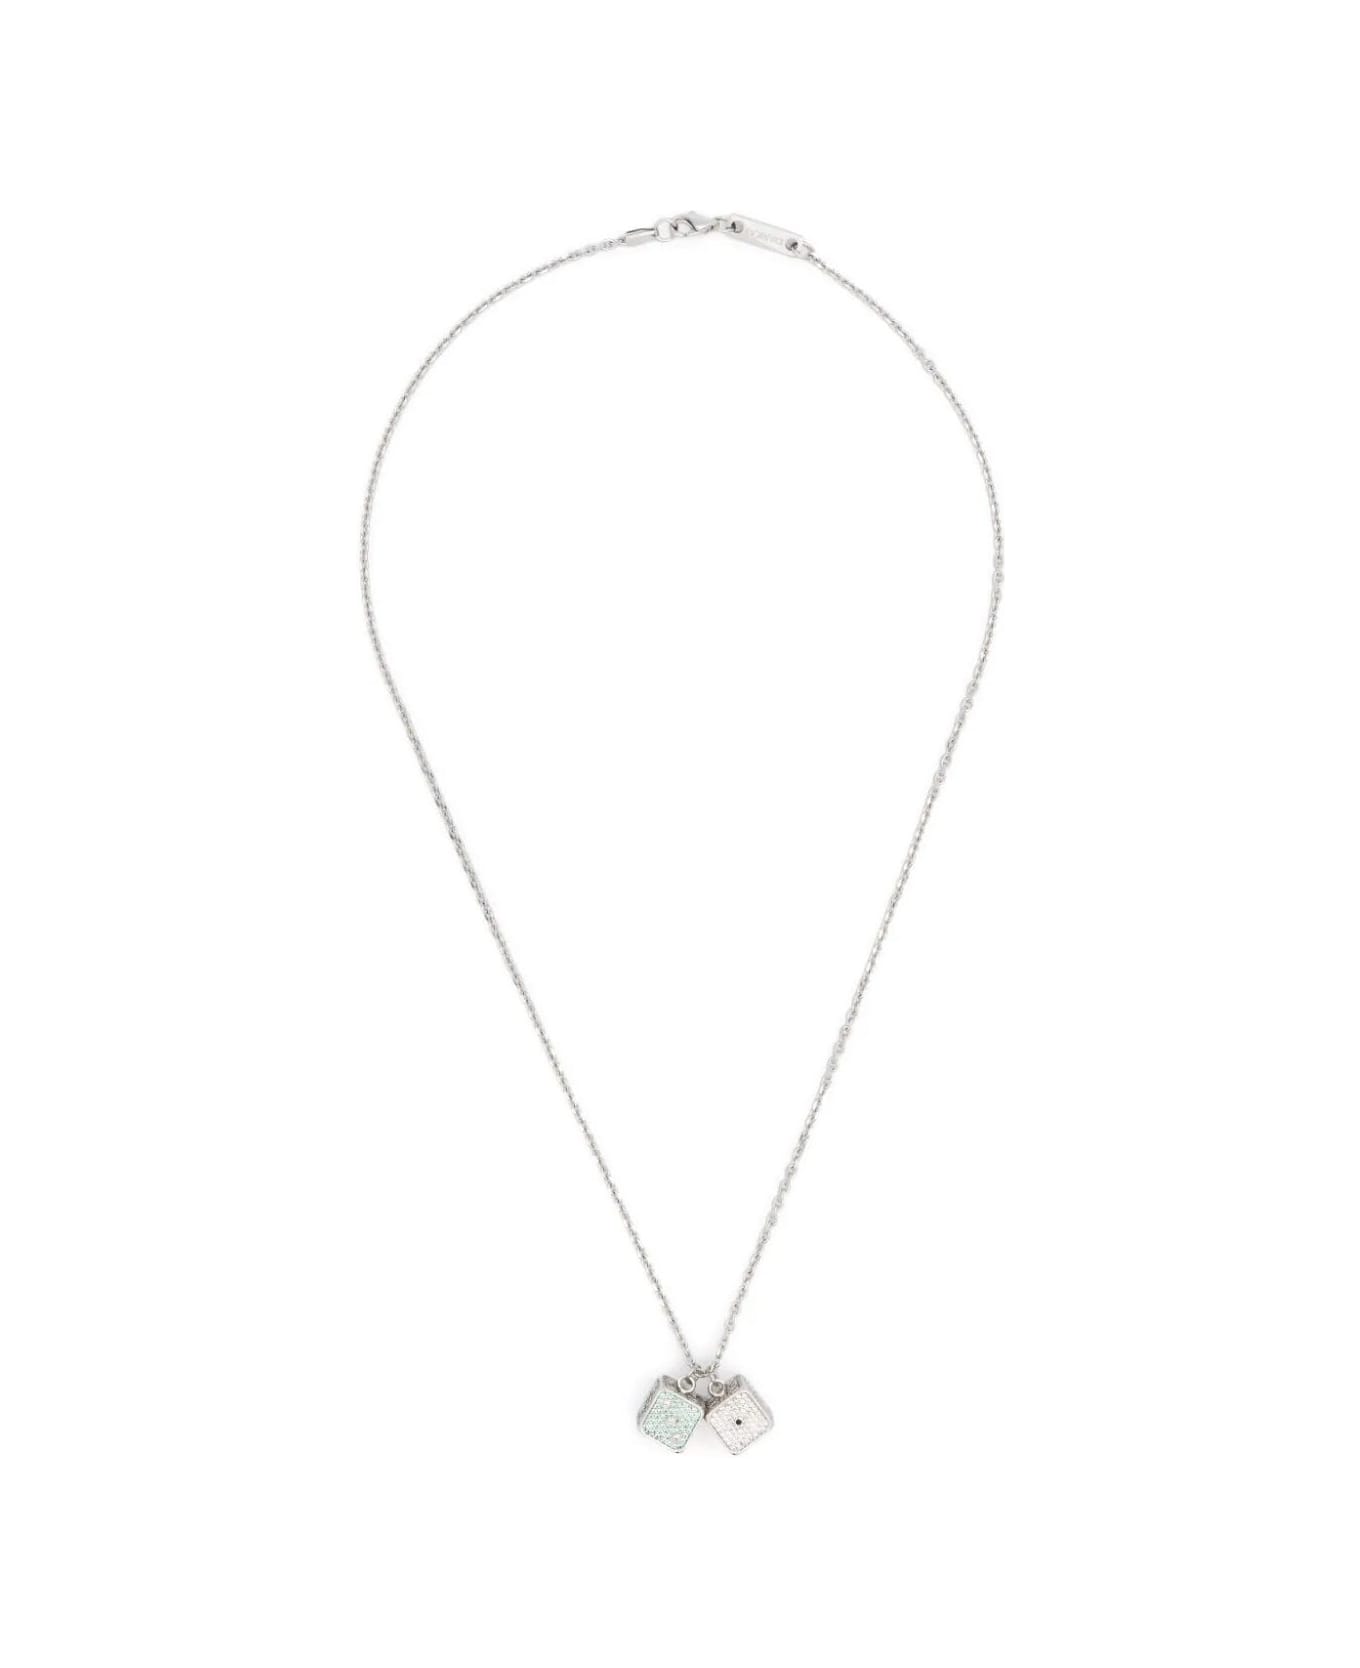 Darkai Dices Necklace - White ネックレス